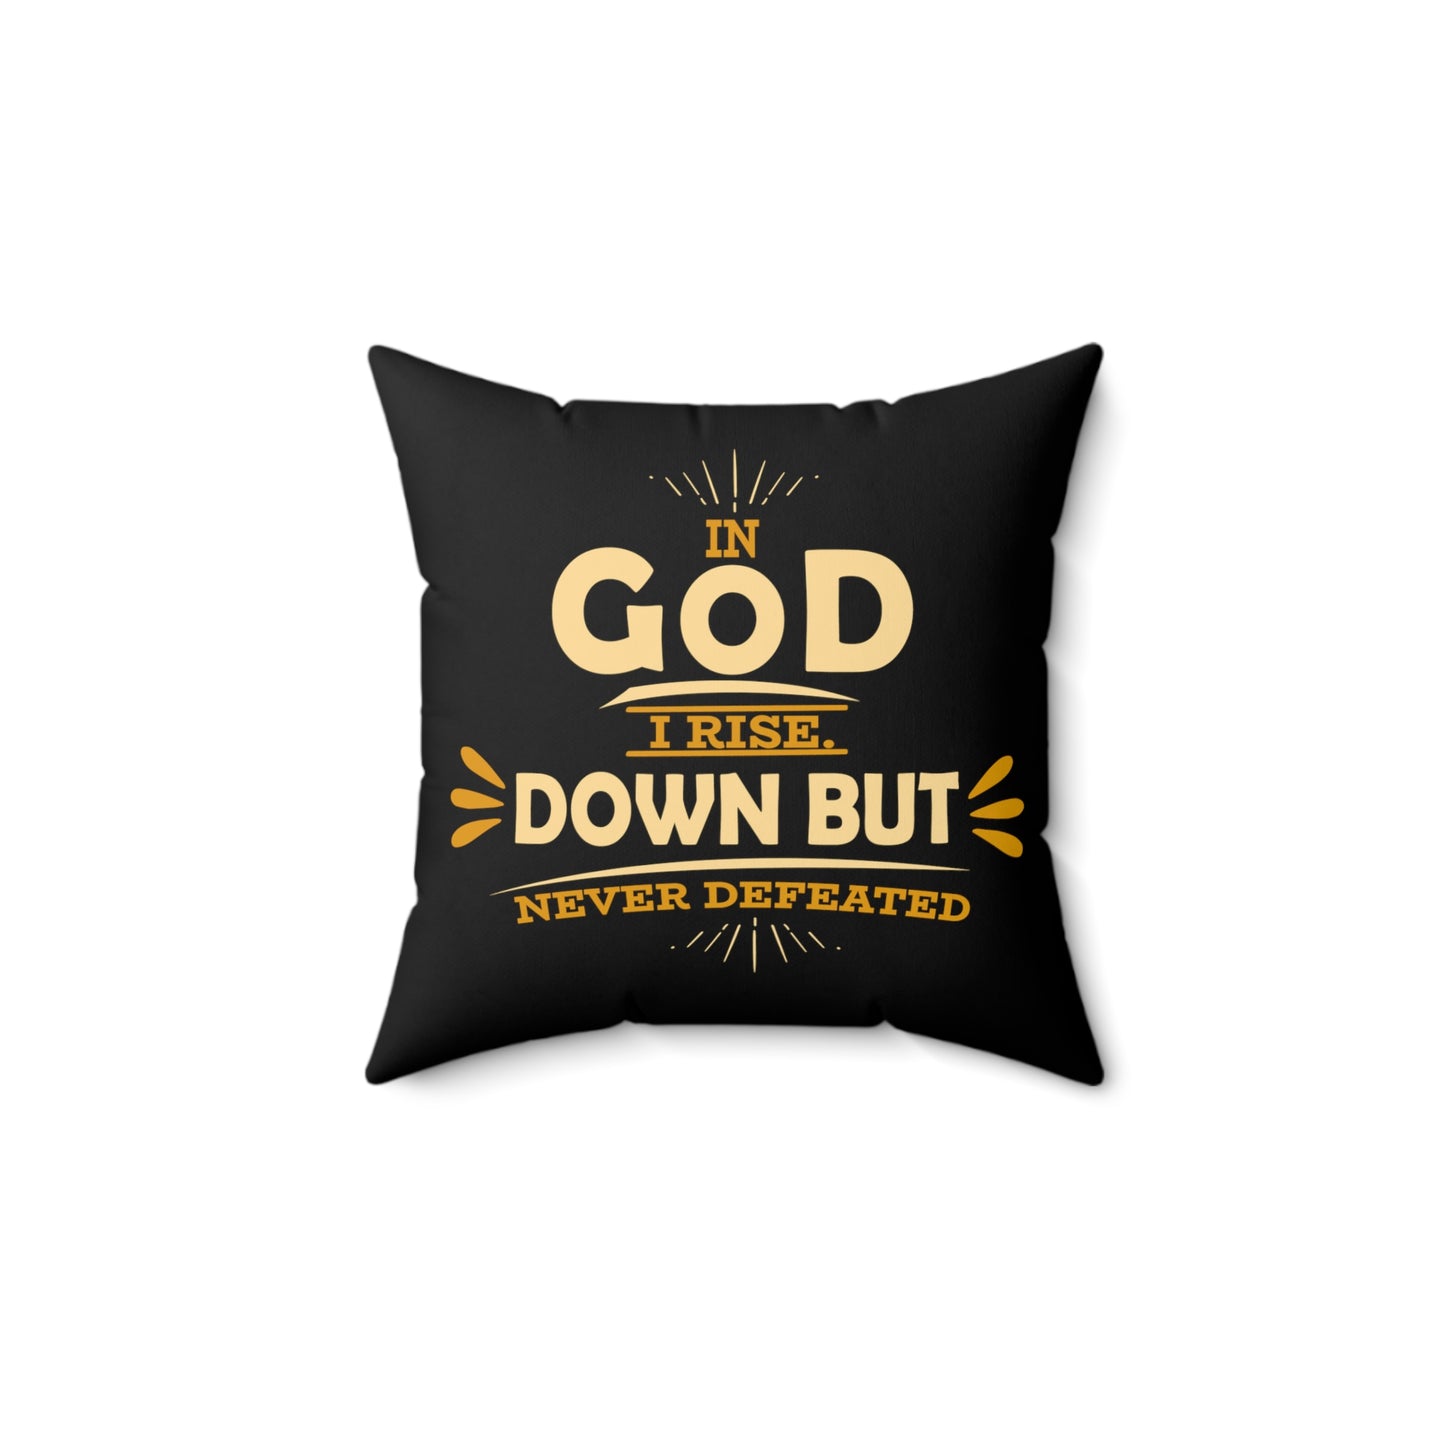 In God I Rise Down But Never Defeated Pillow